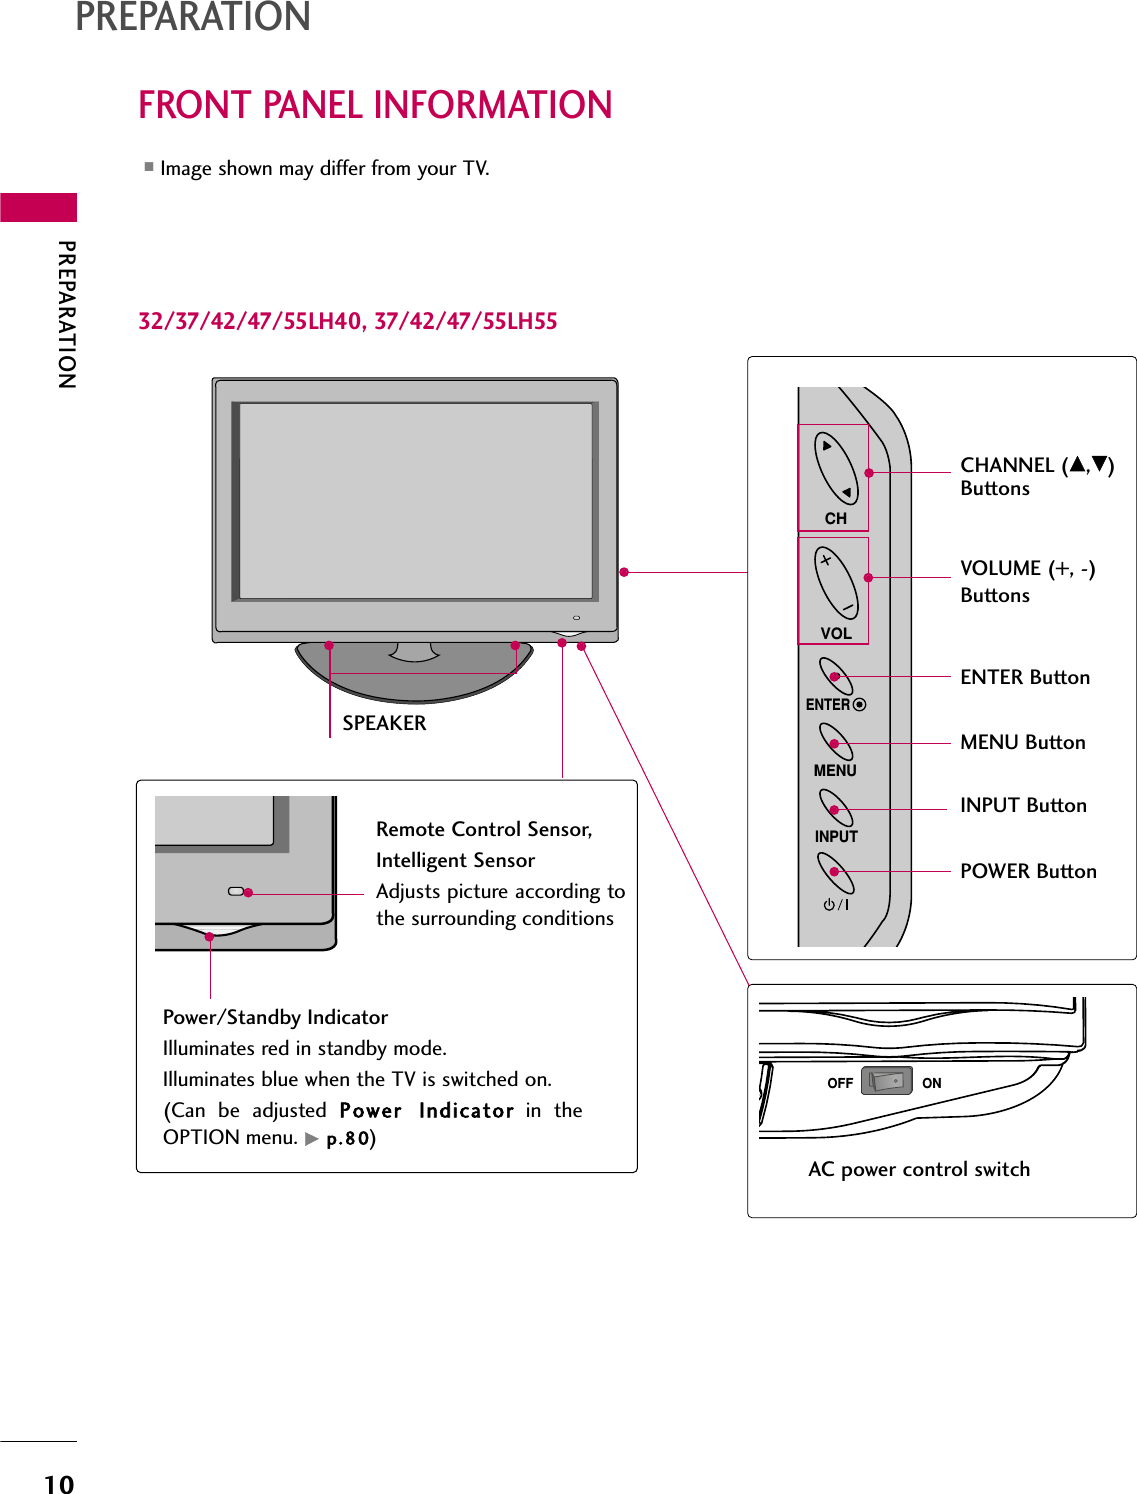 PREPARATION10FRONT PANEL INFORMATIONPREPARATION■Image shown may differ from your TV.INPUTMENUENTERCHVOLCHANNEL (DD,E)ButtonsVOLUME (+, -) ButtonsENTER ButtonMENU ButtonINPUT ButtonPOWER ButtonPower/Standby IndicatorIlluminates red in standby mode.Illuminates blue when the TV is switched on.(Can be adjusted Power  Indicator in theOPTION menu. Gp.80)Remote Control Sensor,Intelligent SensorAdjusts picture according tothe surrounding conditions 32/37/42/47/55LH40, 37/42/47/55LH55AC power control switchOFF ONSPEAKER